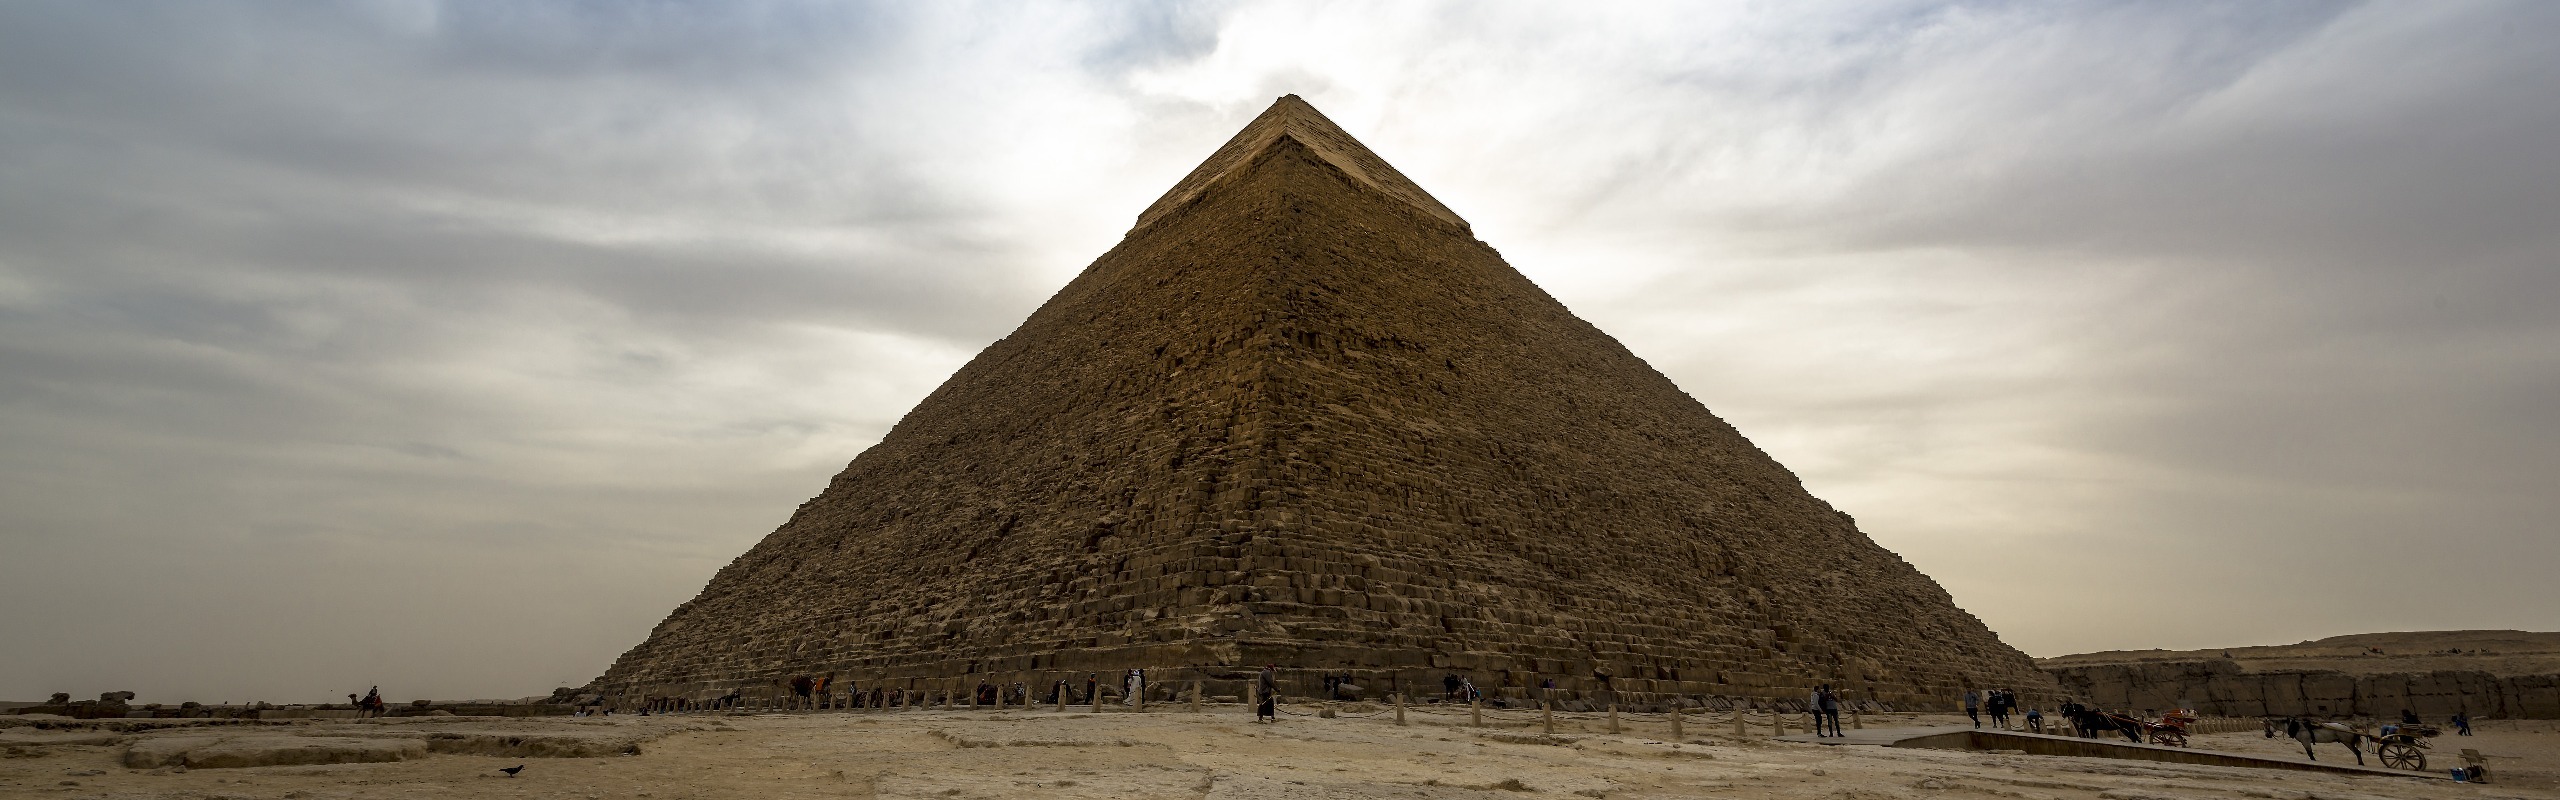 The Great Pyramid of Giza (Khufu Pyramid): How to Visit It